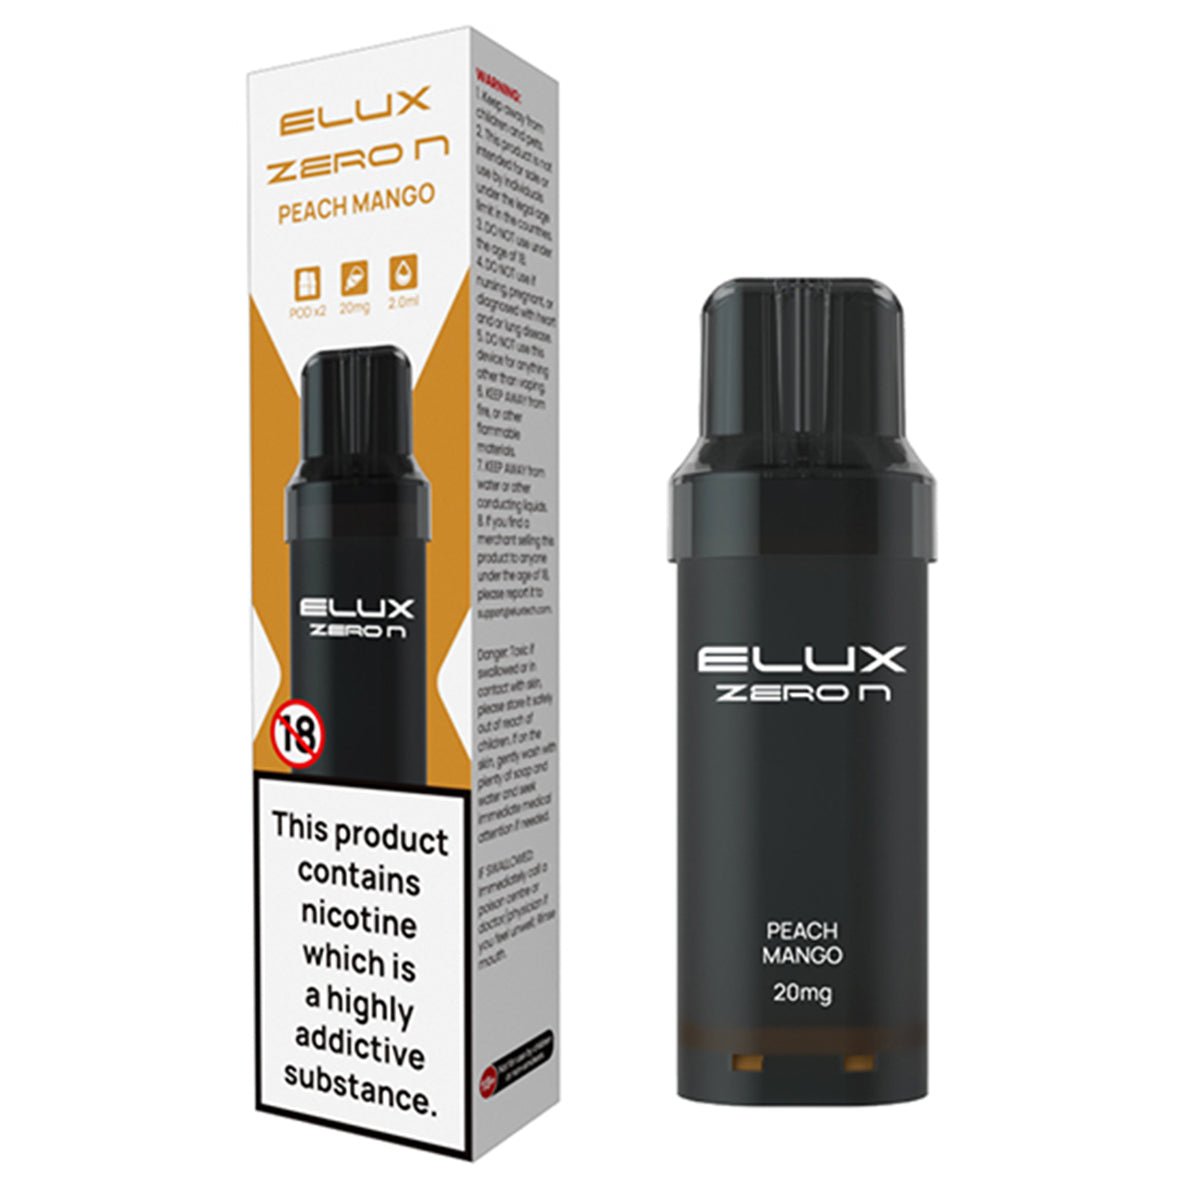 Peach Mango Zero N Pre-filled Pods By Elux - Prime Vapes UK